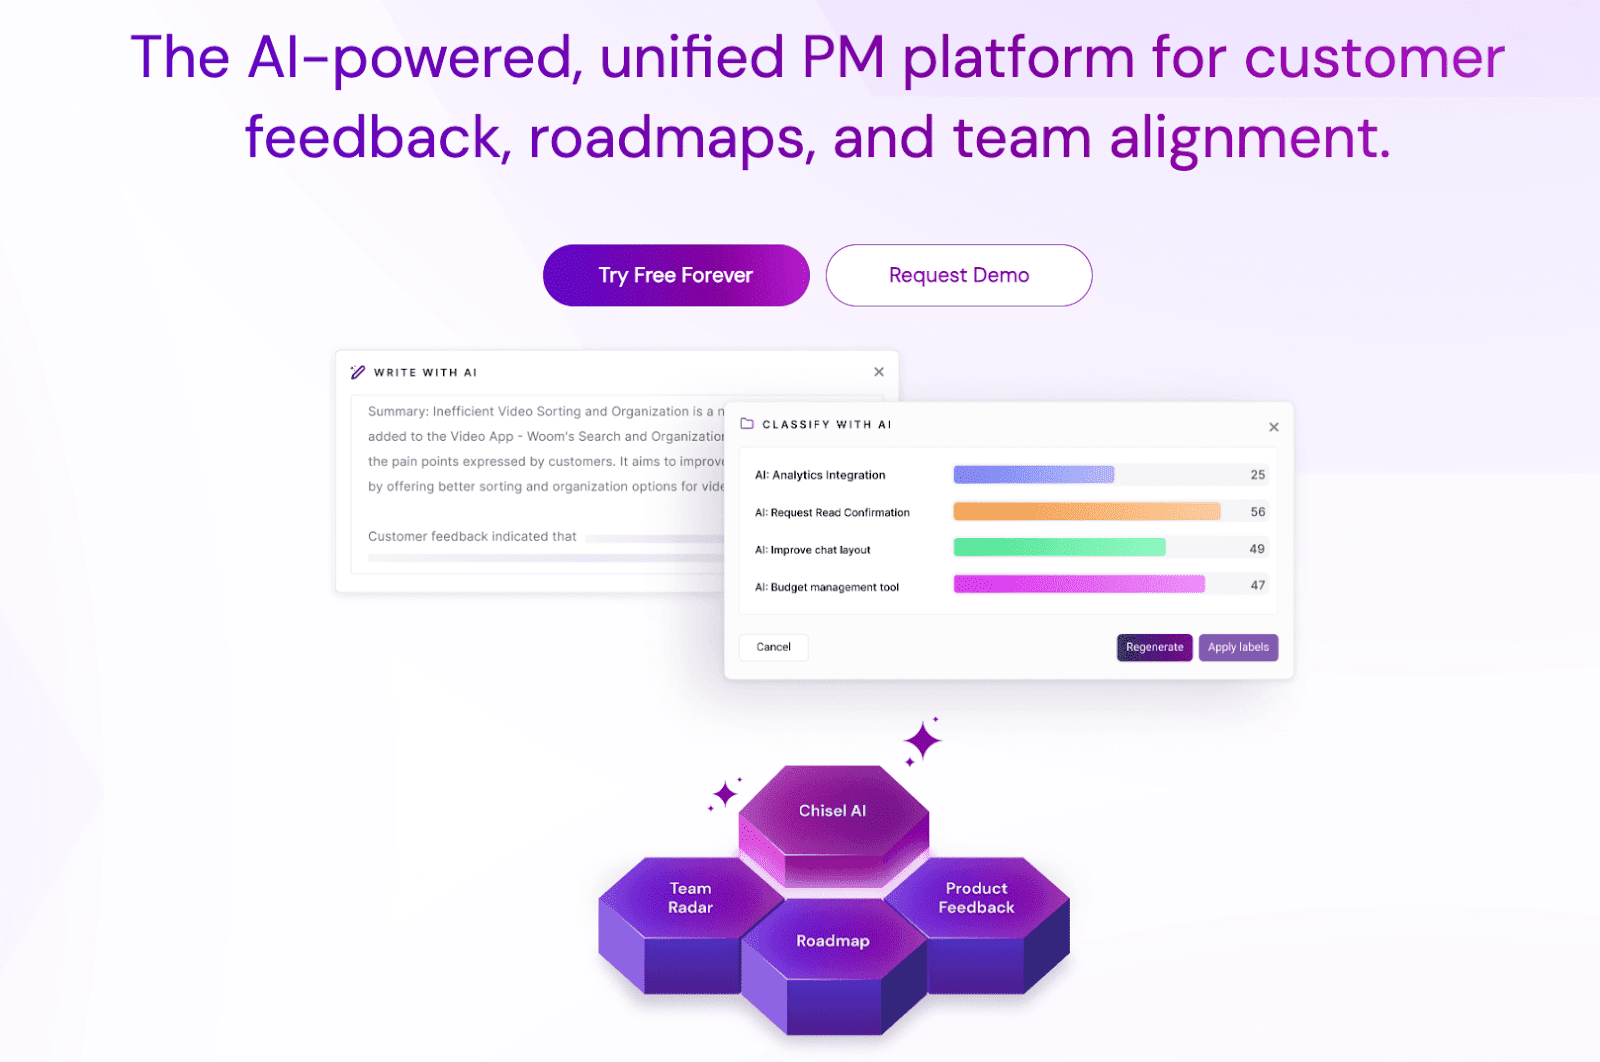 Chisel AI accelerates product management tasks, including envisioning, discovery, prioritization, and feedback collection, at scale for both customers and internal teams.